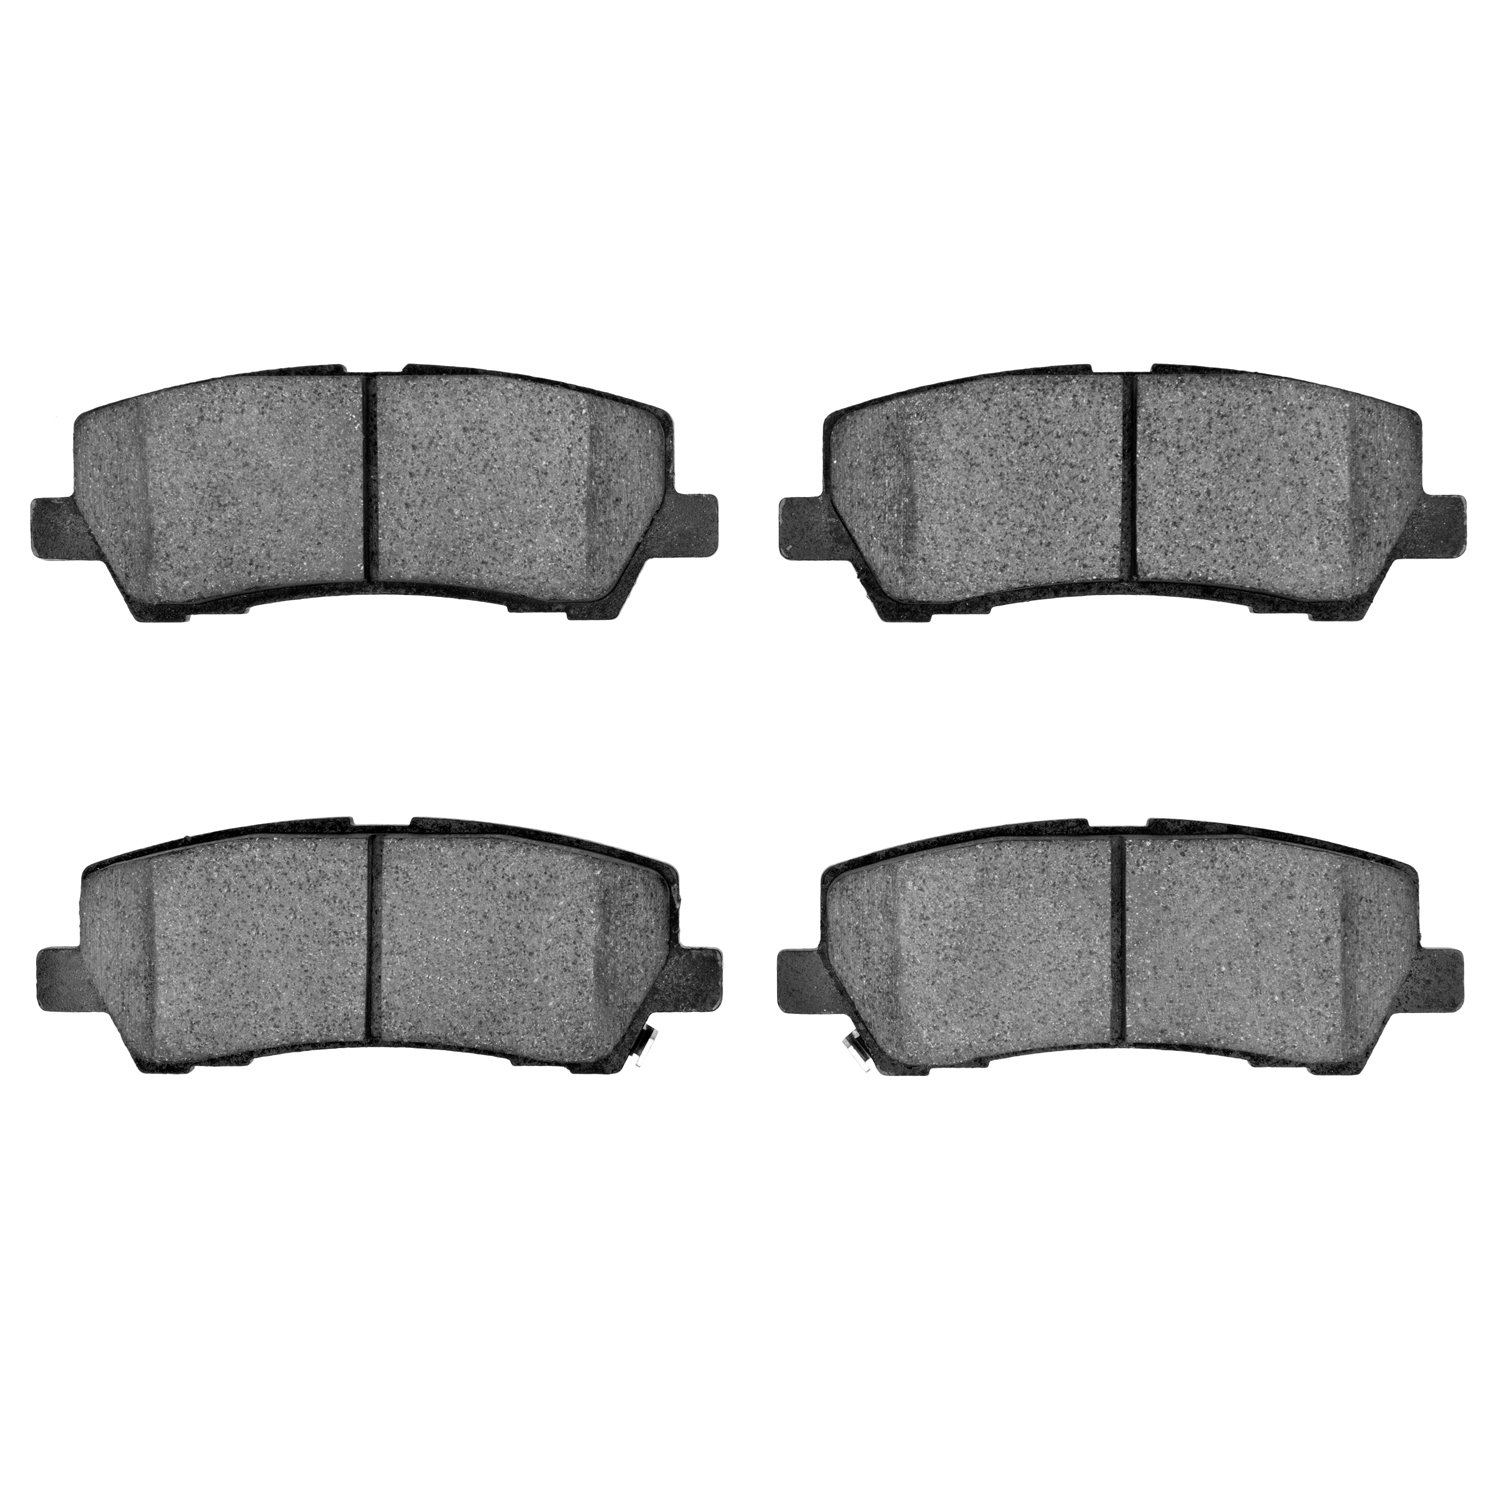 1000-1793-00 Track/Street Low-Metallic Brake Pads Kit, Fits Select Ford/Lincoln/Mercury/Mazda, Position: Rear